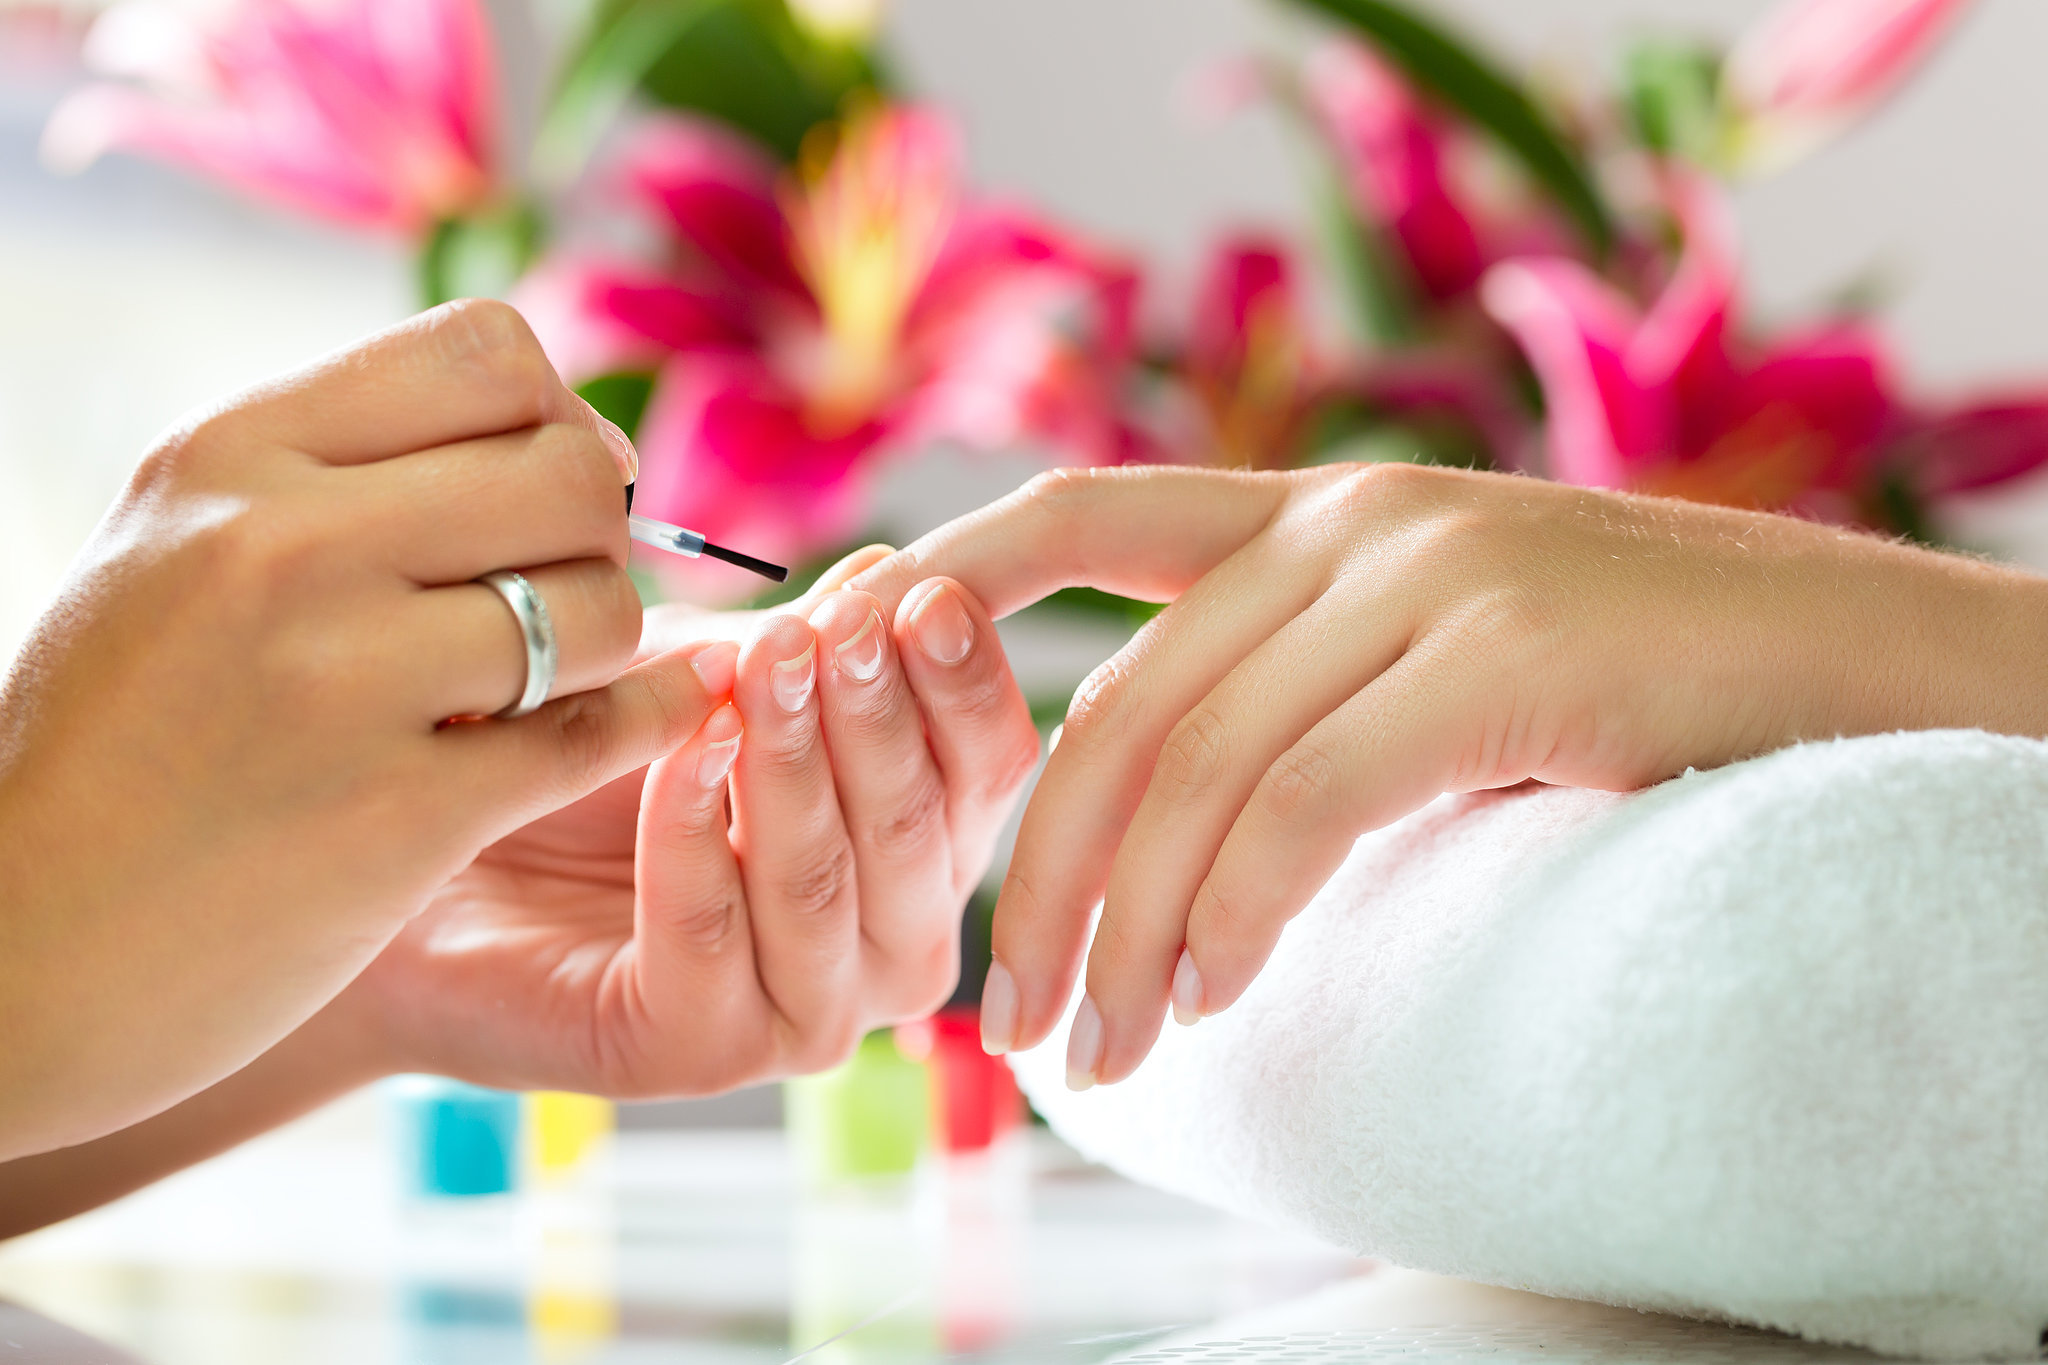 Manicure and Pedicure Prices - wide 5